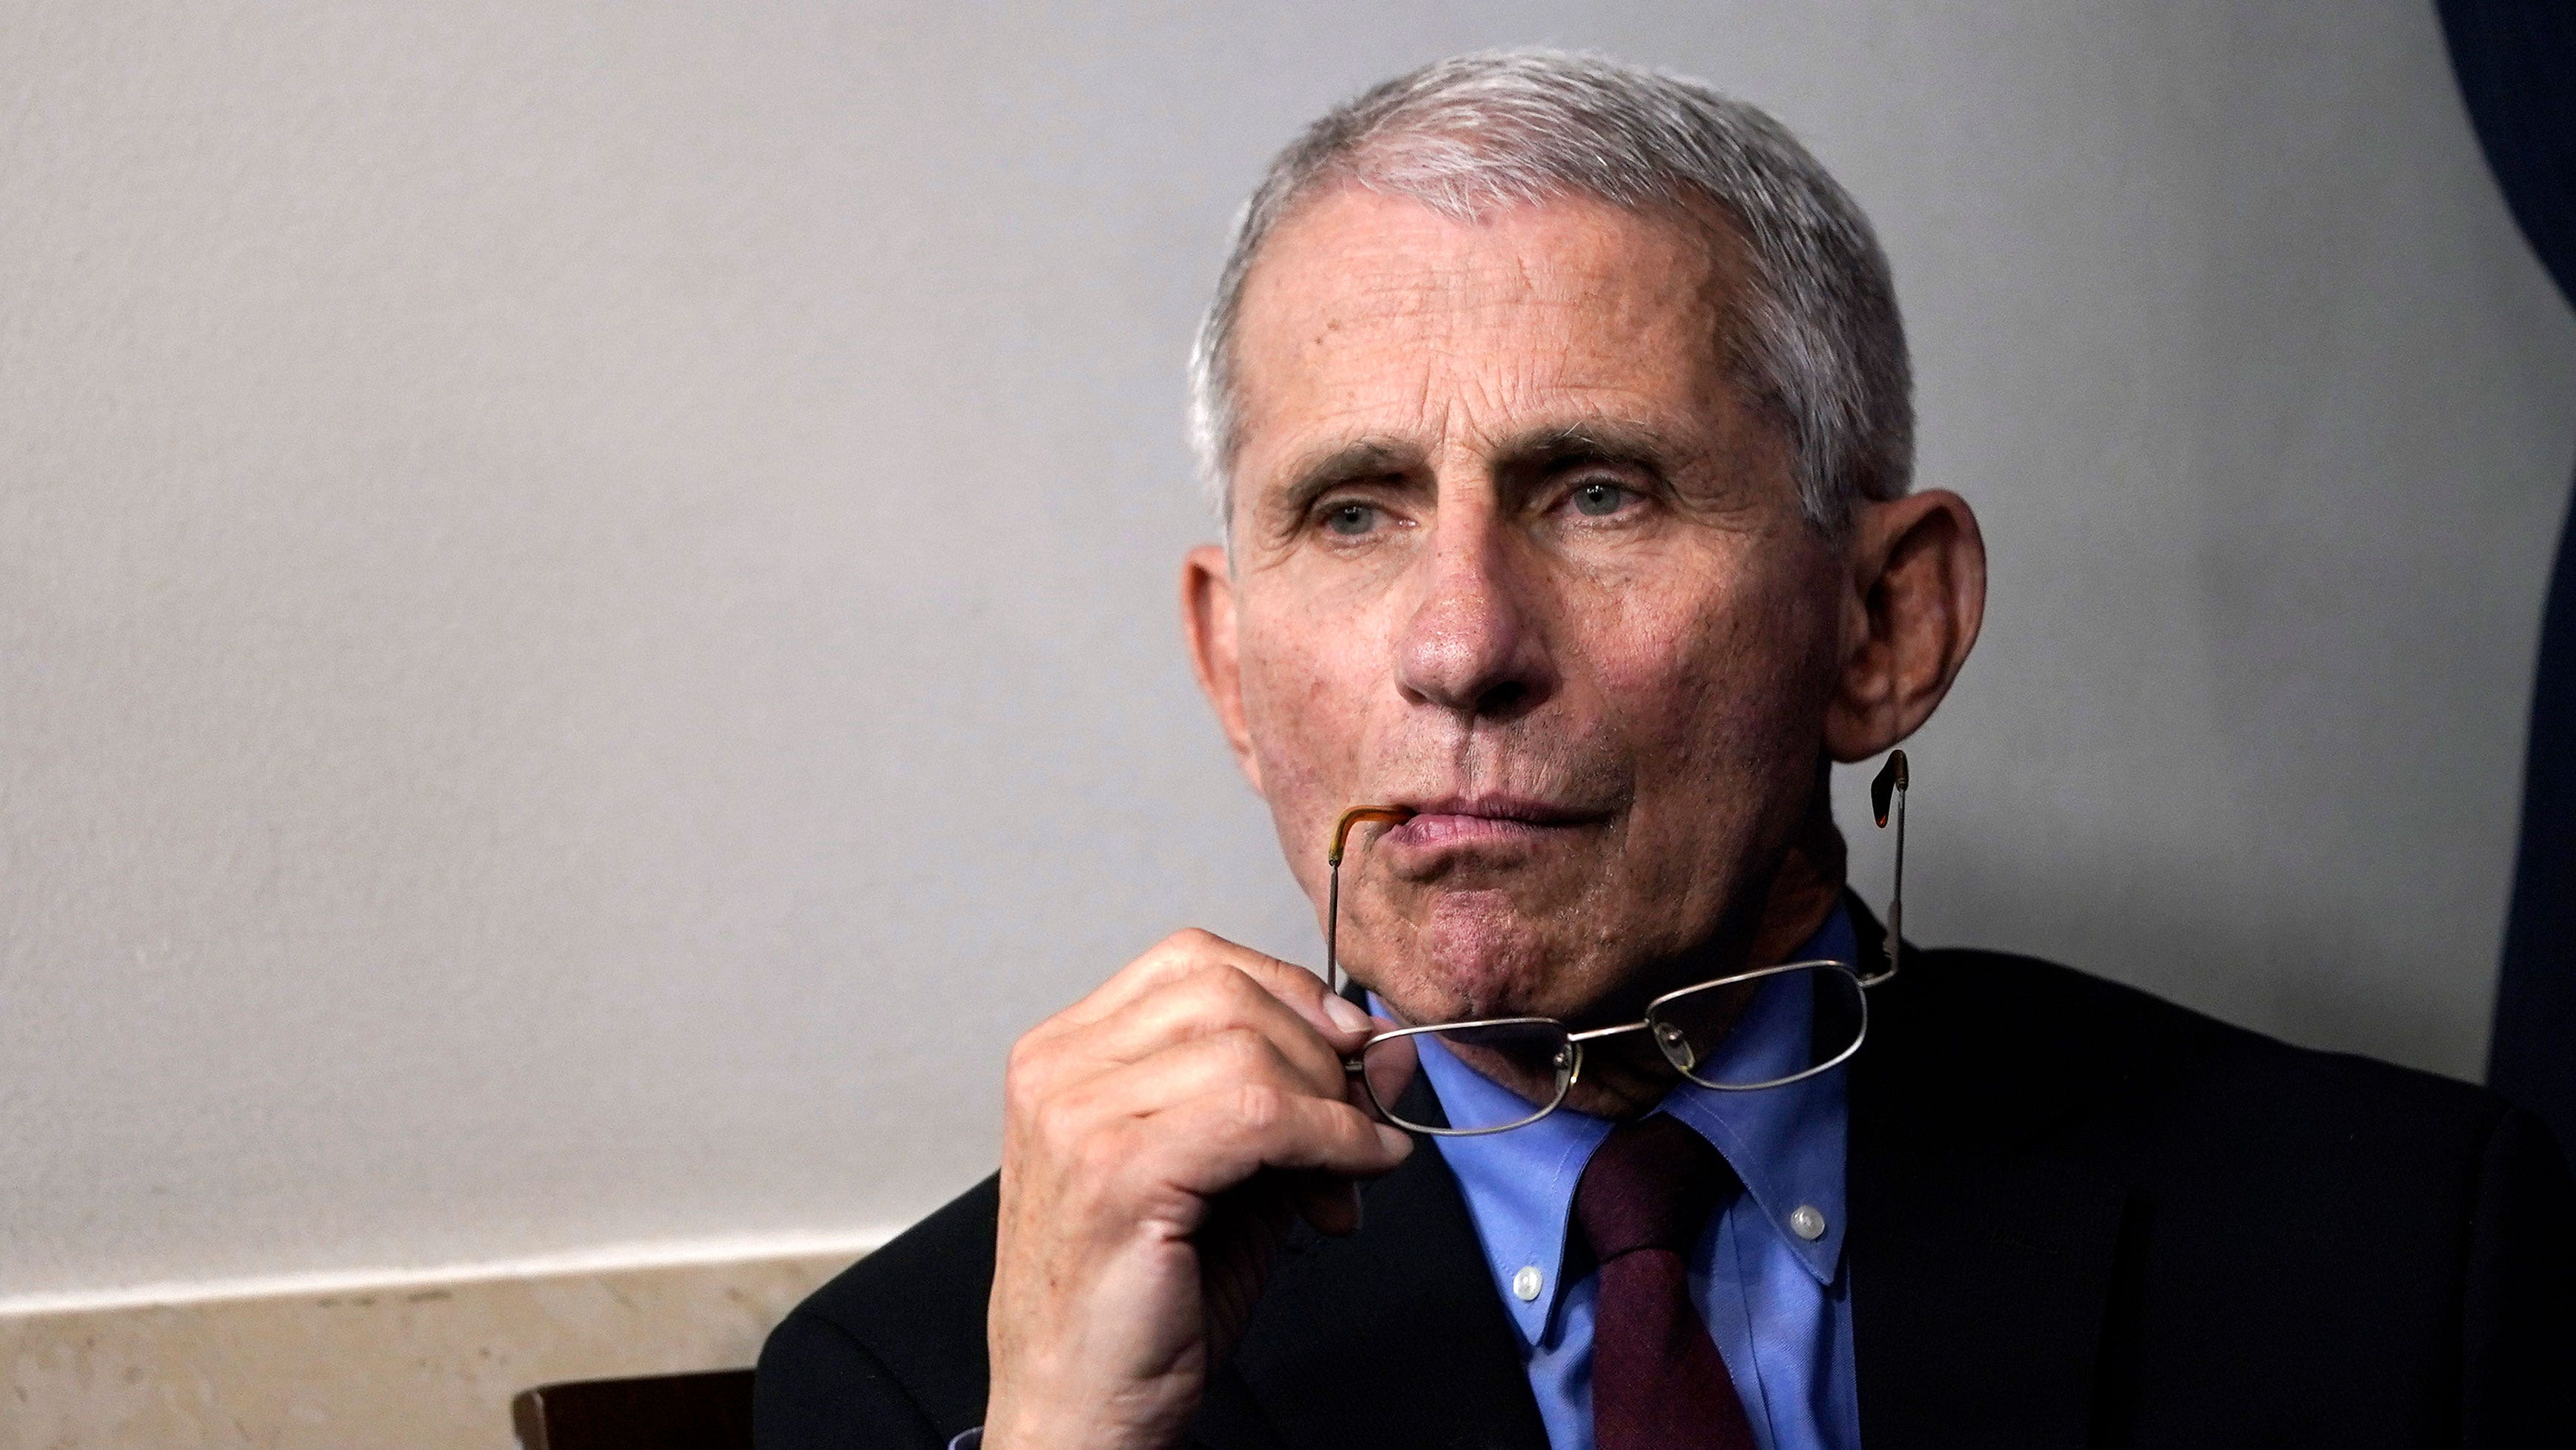 National Institute of Allergy and Infectious Diseases (NIAID) Director at the National Institutes of Health (NIH), Dr. Anthony Fauci (Getty Images)